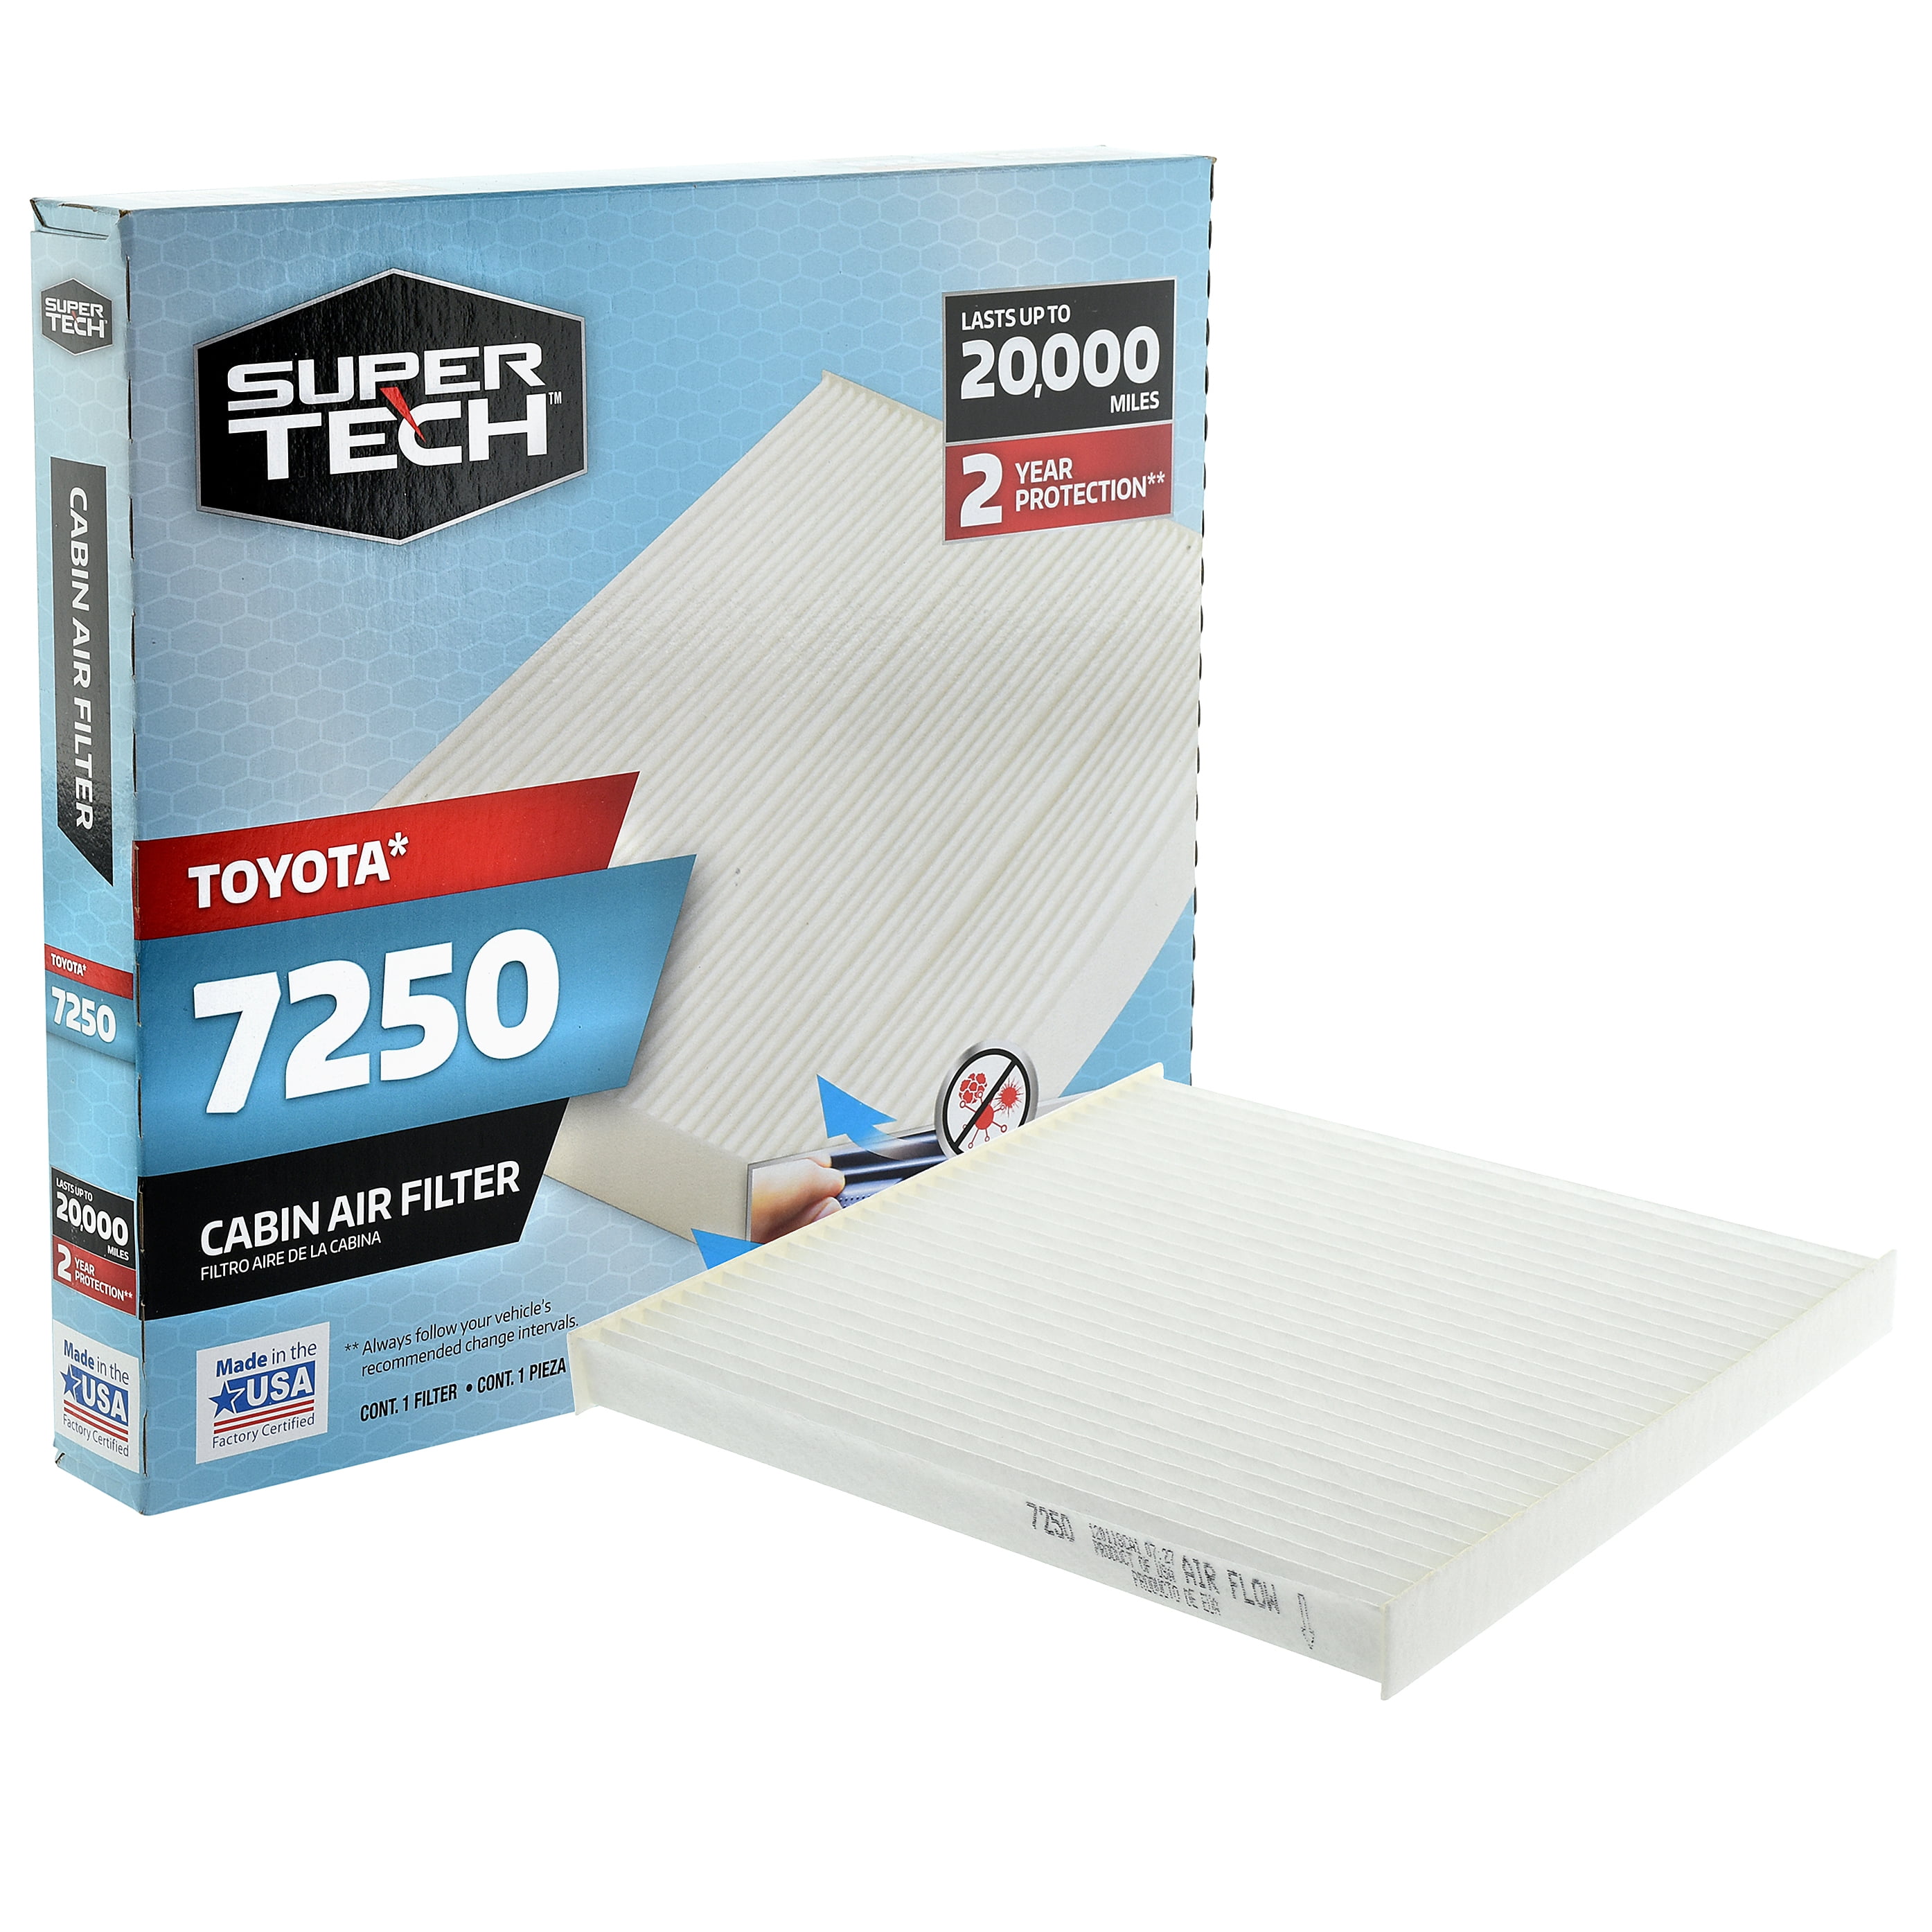 Supertech 7250 Cabin Air & Dust Filter Replacement for Toyota - Each